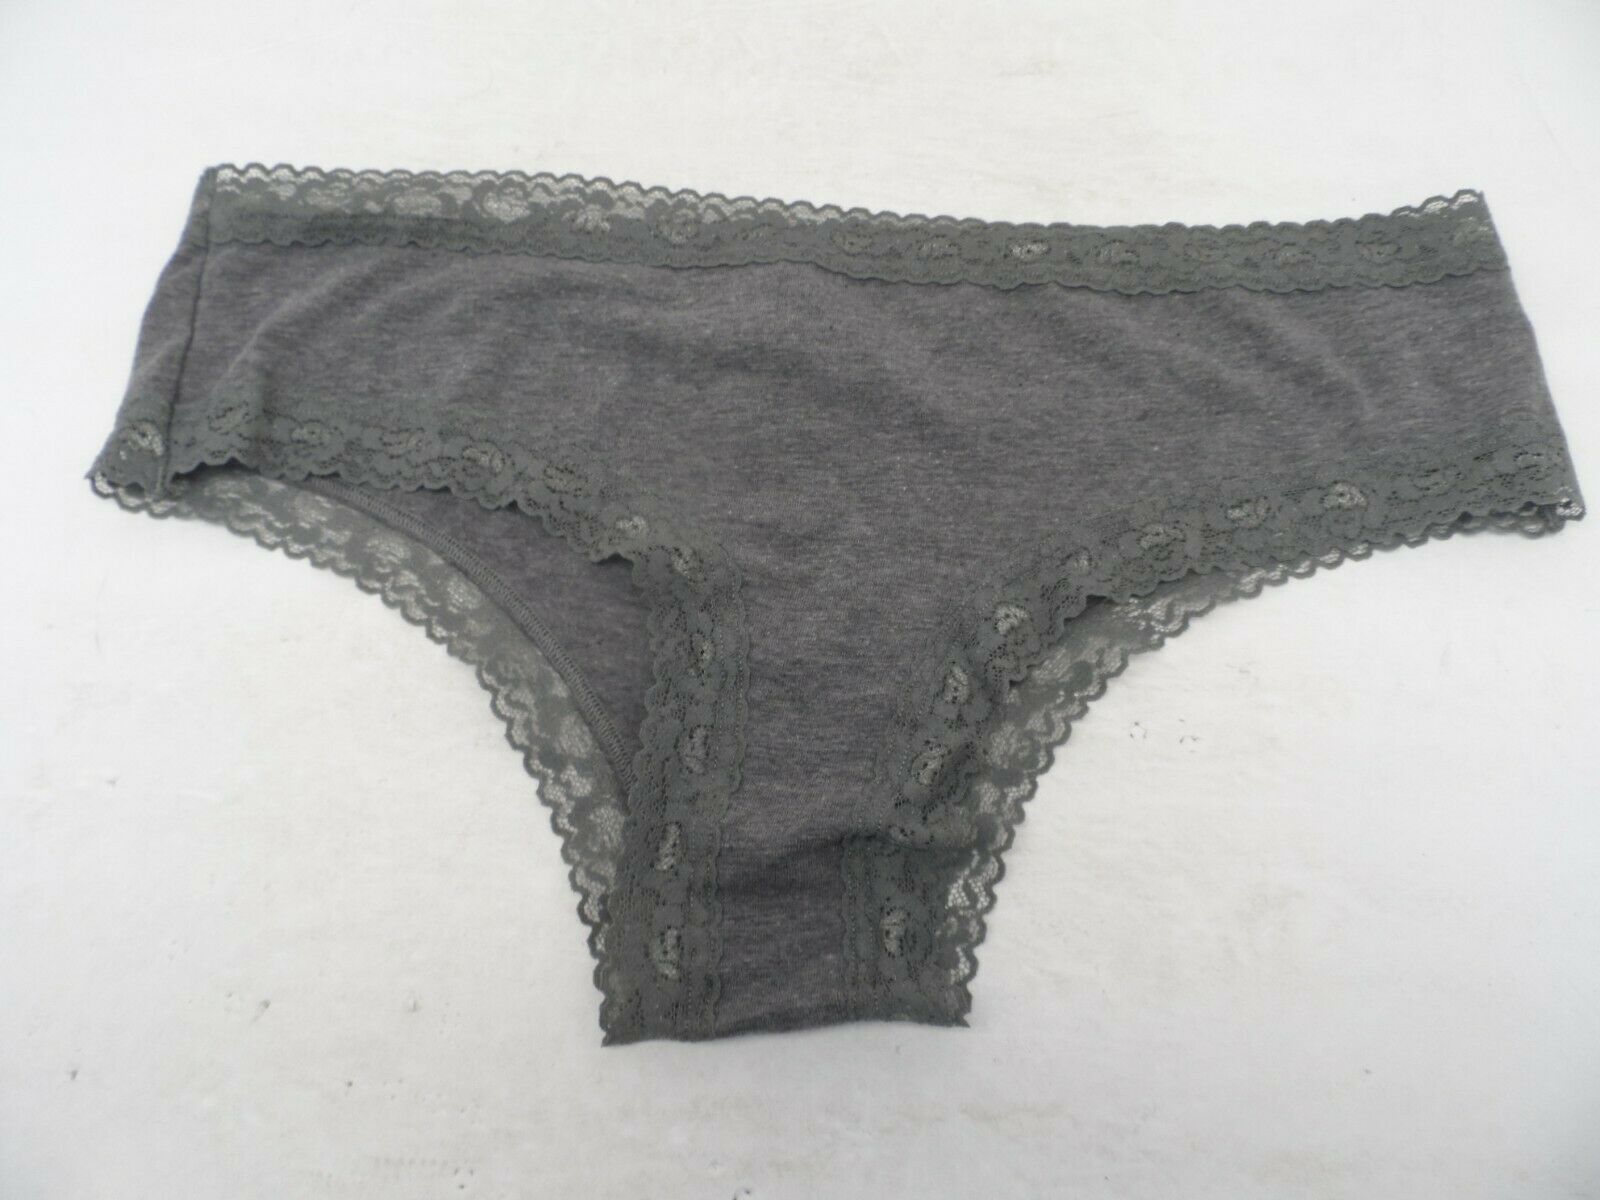 Primary image for Adore Me Women's Cheeky Lace Mesh Panty 09440 Gray Size Small